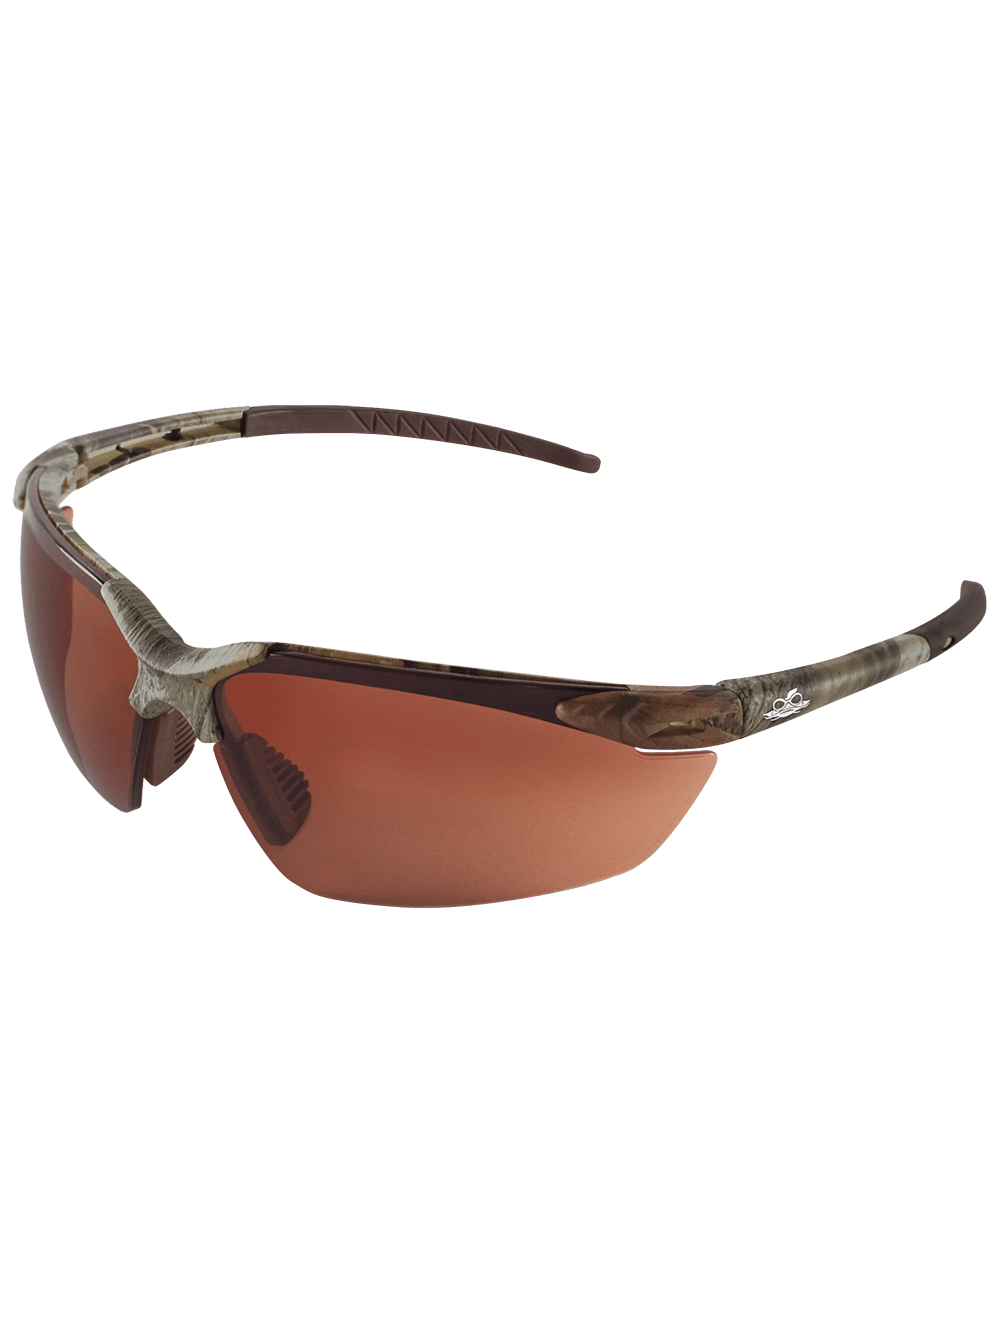 Mojarra® Brown Lens, Woodland Camouflage Frame Safety Glasses - LIMITED STOCK - BH11108